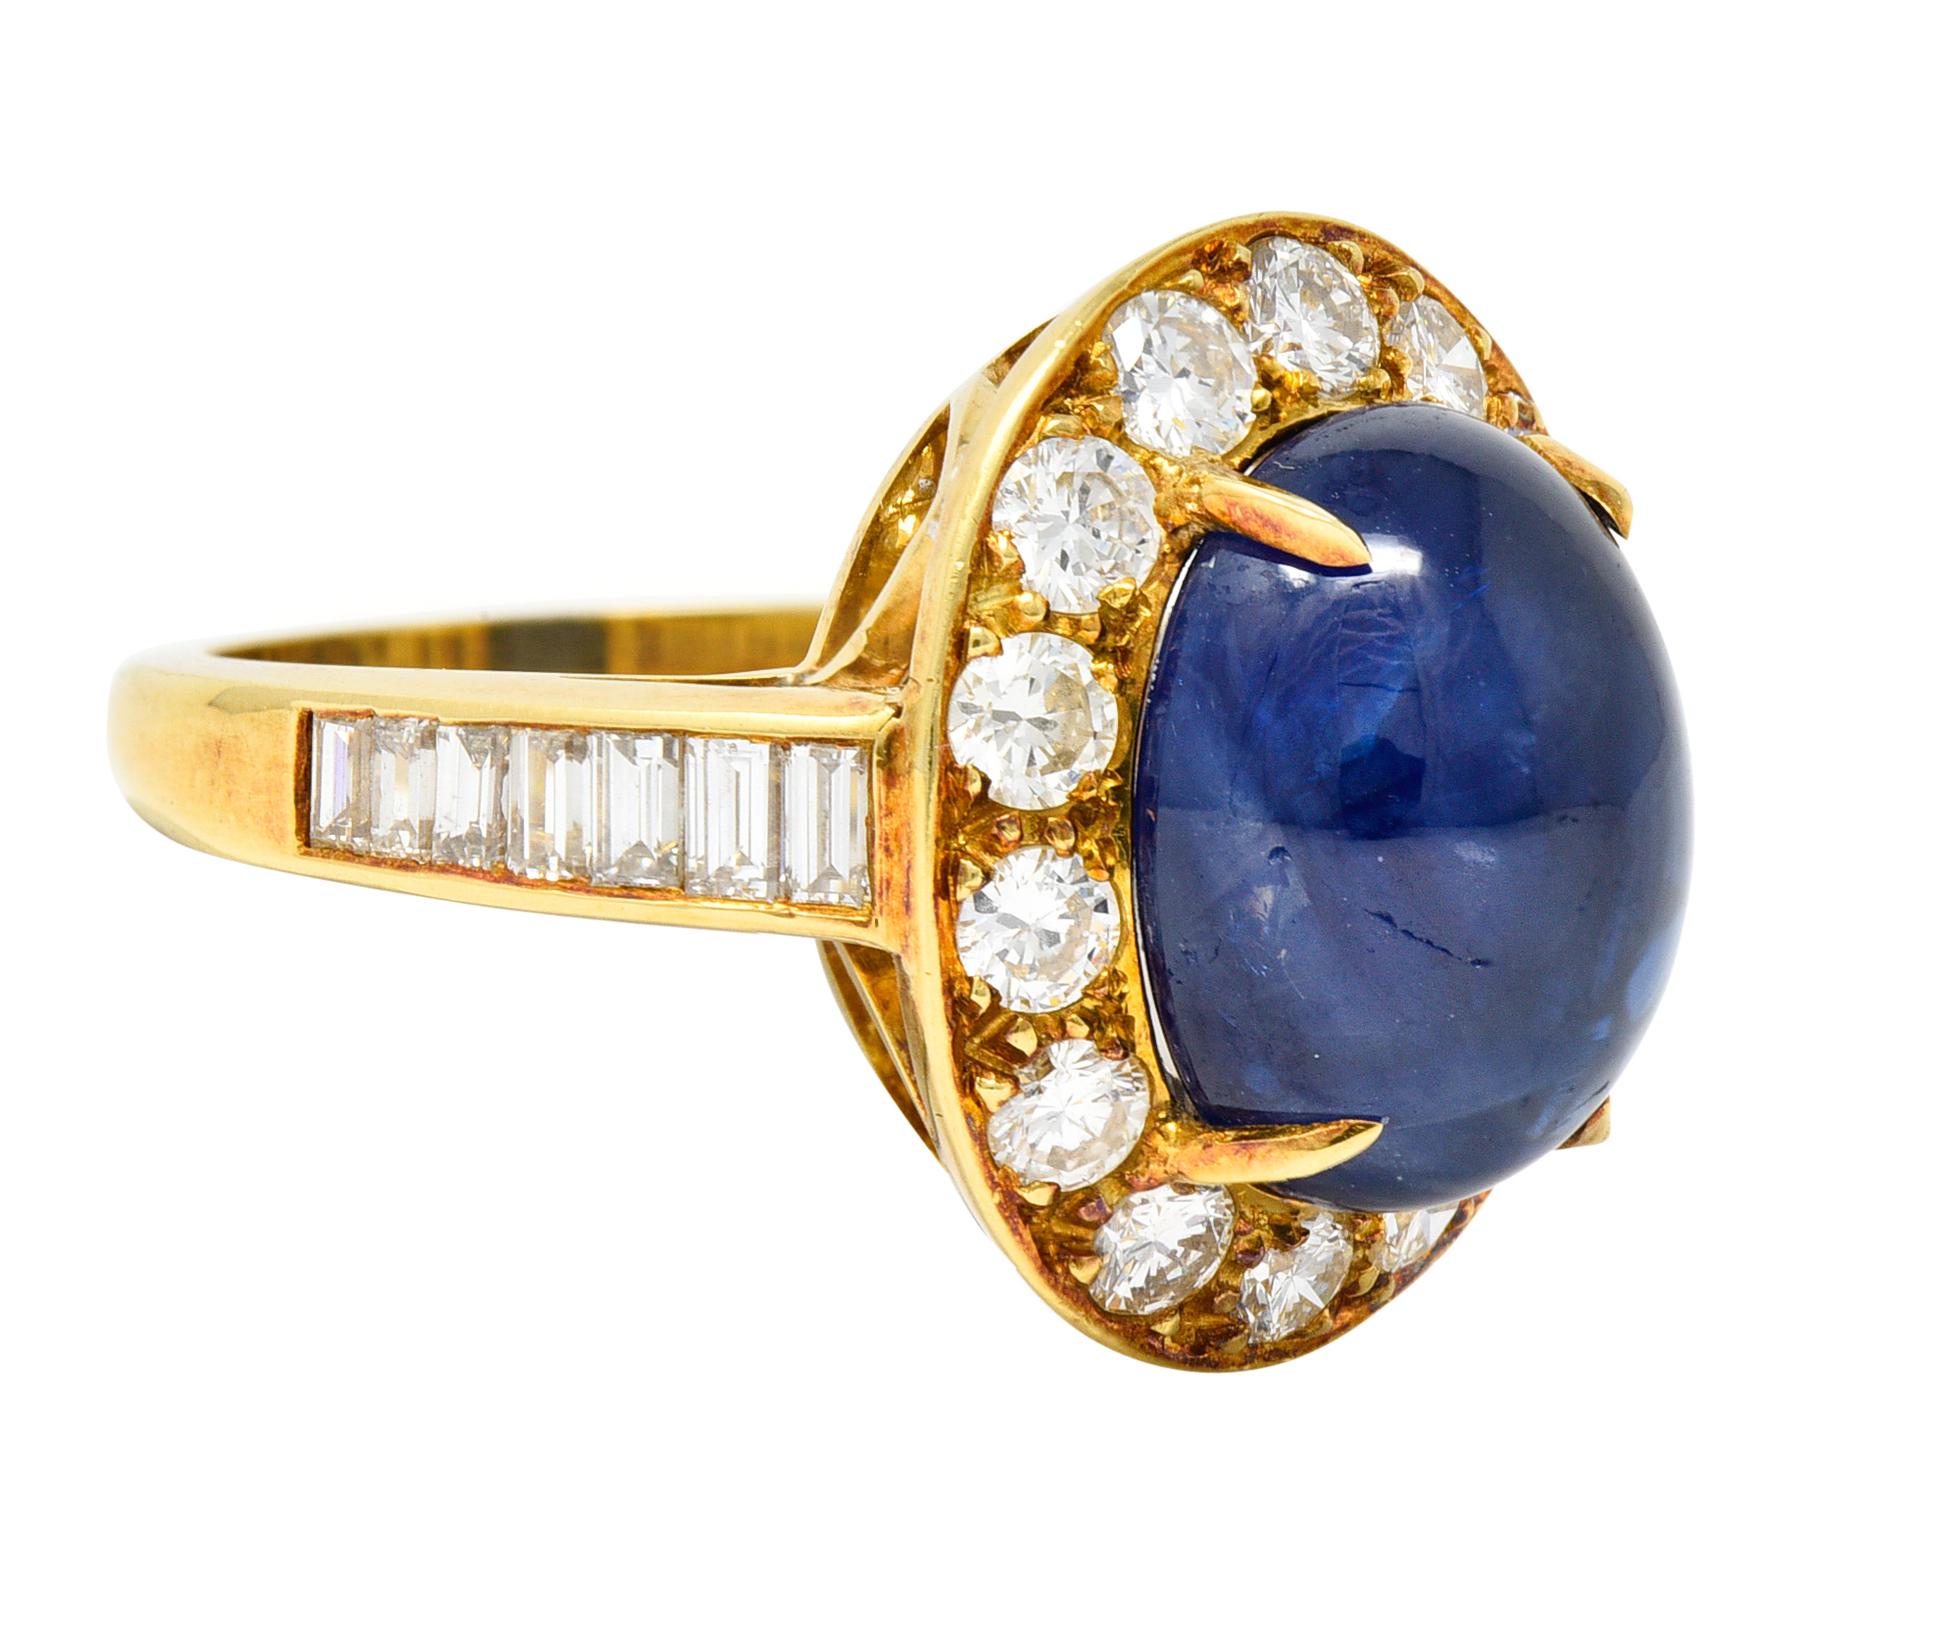 Centering an oval shaped sapphire cabochon weighing approximately 8.62 carats - transparent medium blue
Set with talon prongs with a halo surround of round brilliant cut diamonds
Flanked by cathedral shoulders with channel set baguette cut